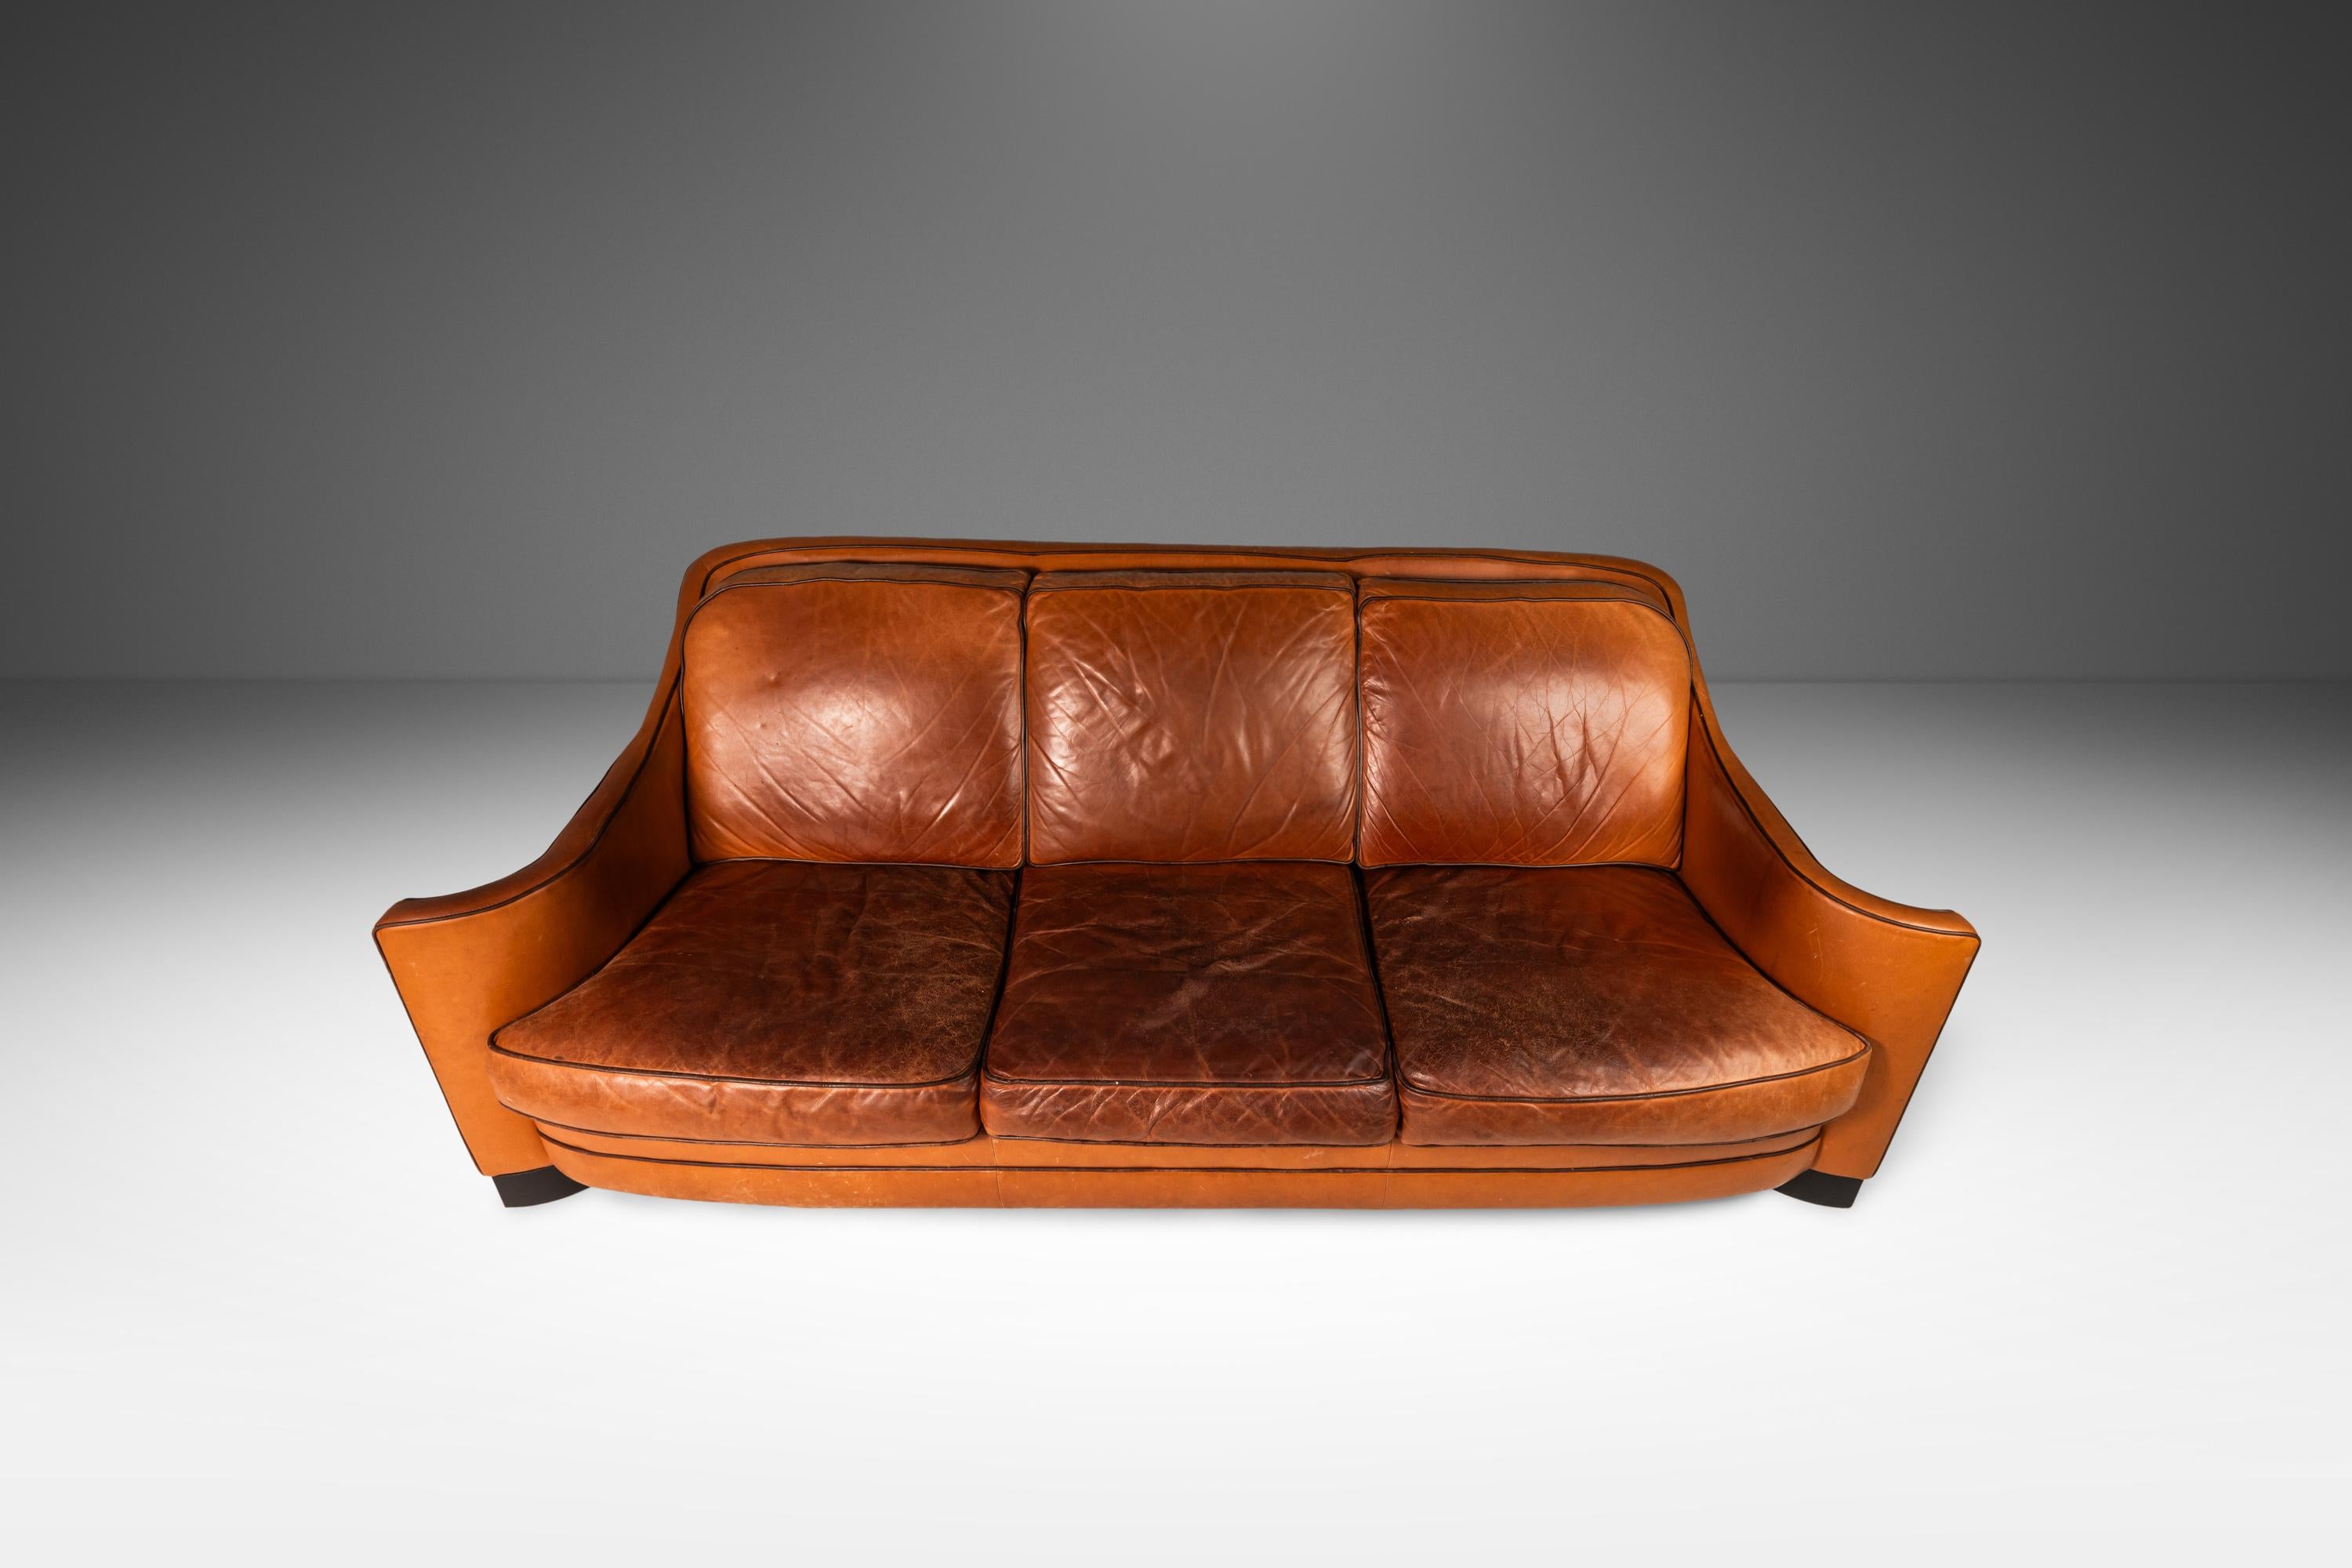 American Art Deco Style Three-Seater Sofa with Sculptural Arms in Patinaed Leather, 1970s For Sale